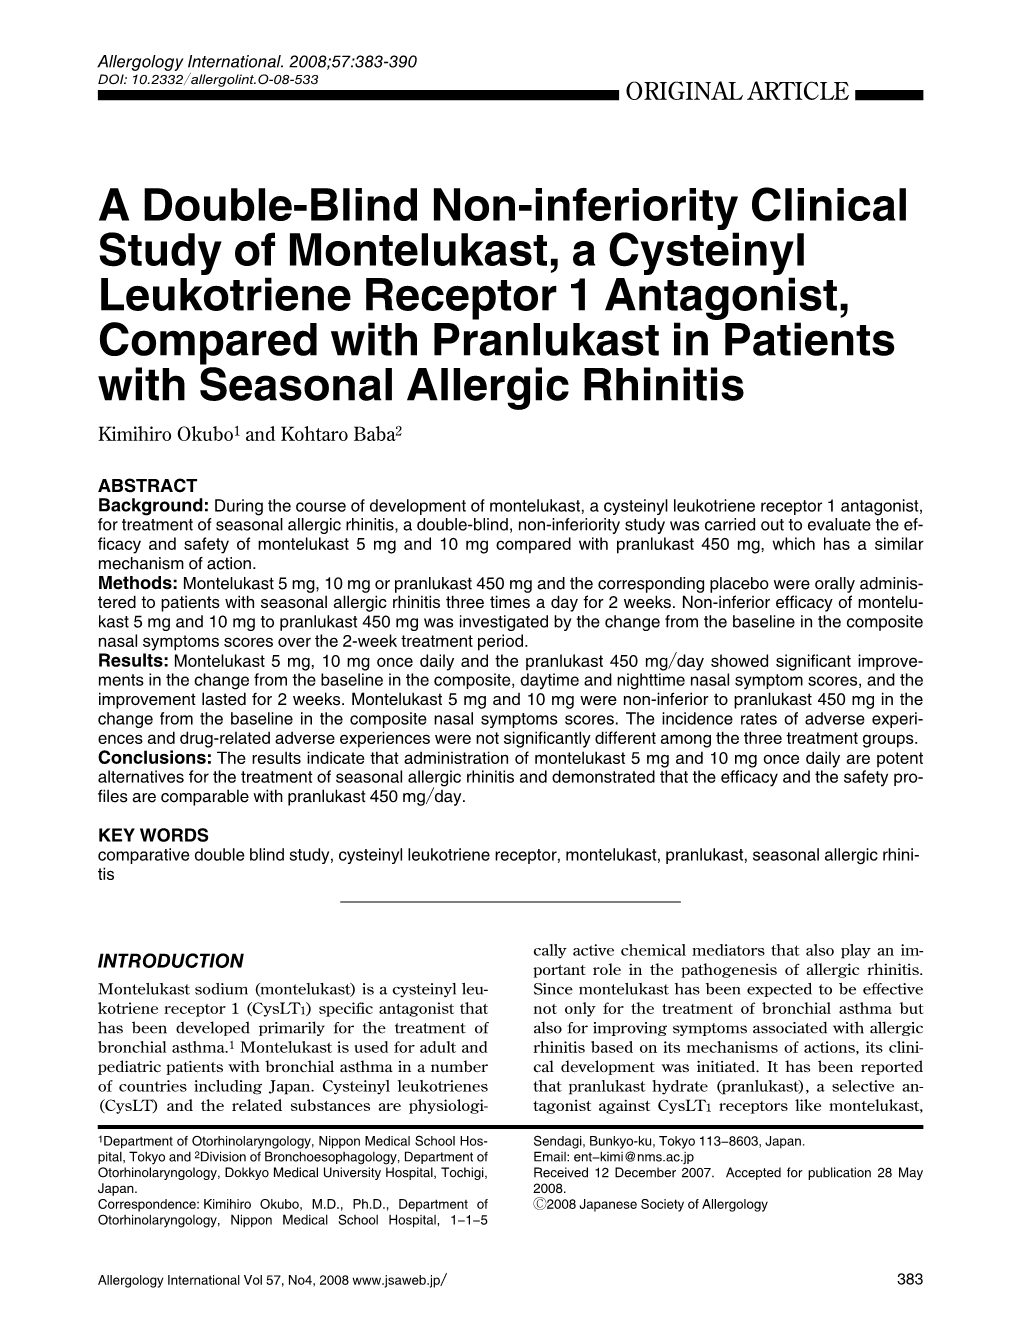 A Double-Blind Non-Inferiority Clinical Study of Montelukast, a Cysteinyl